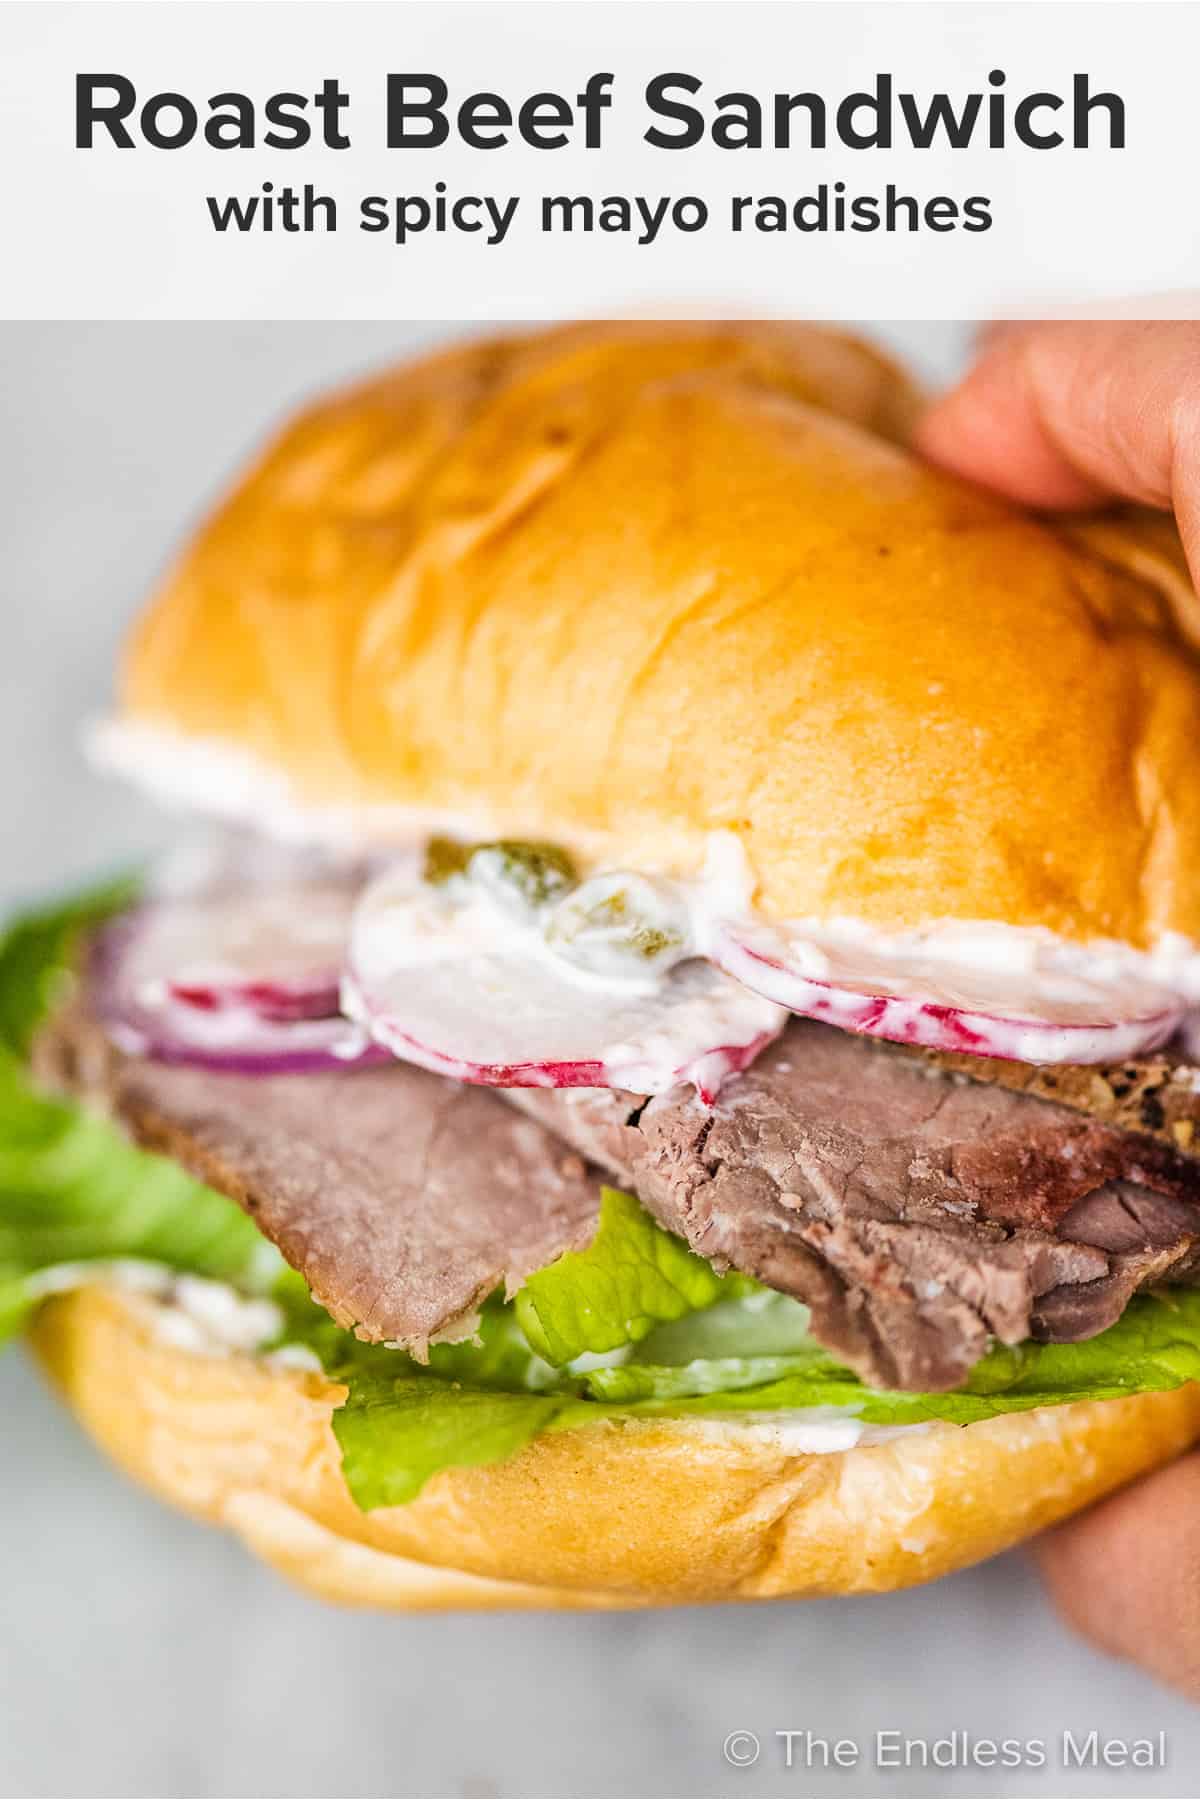 A hand holding a roast beef sandwich with the recipe title on top of the picture.